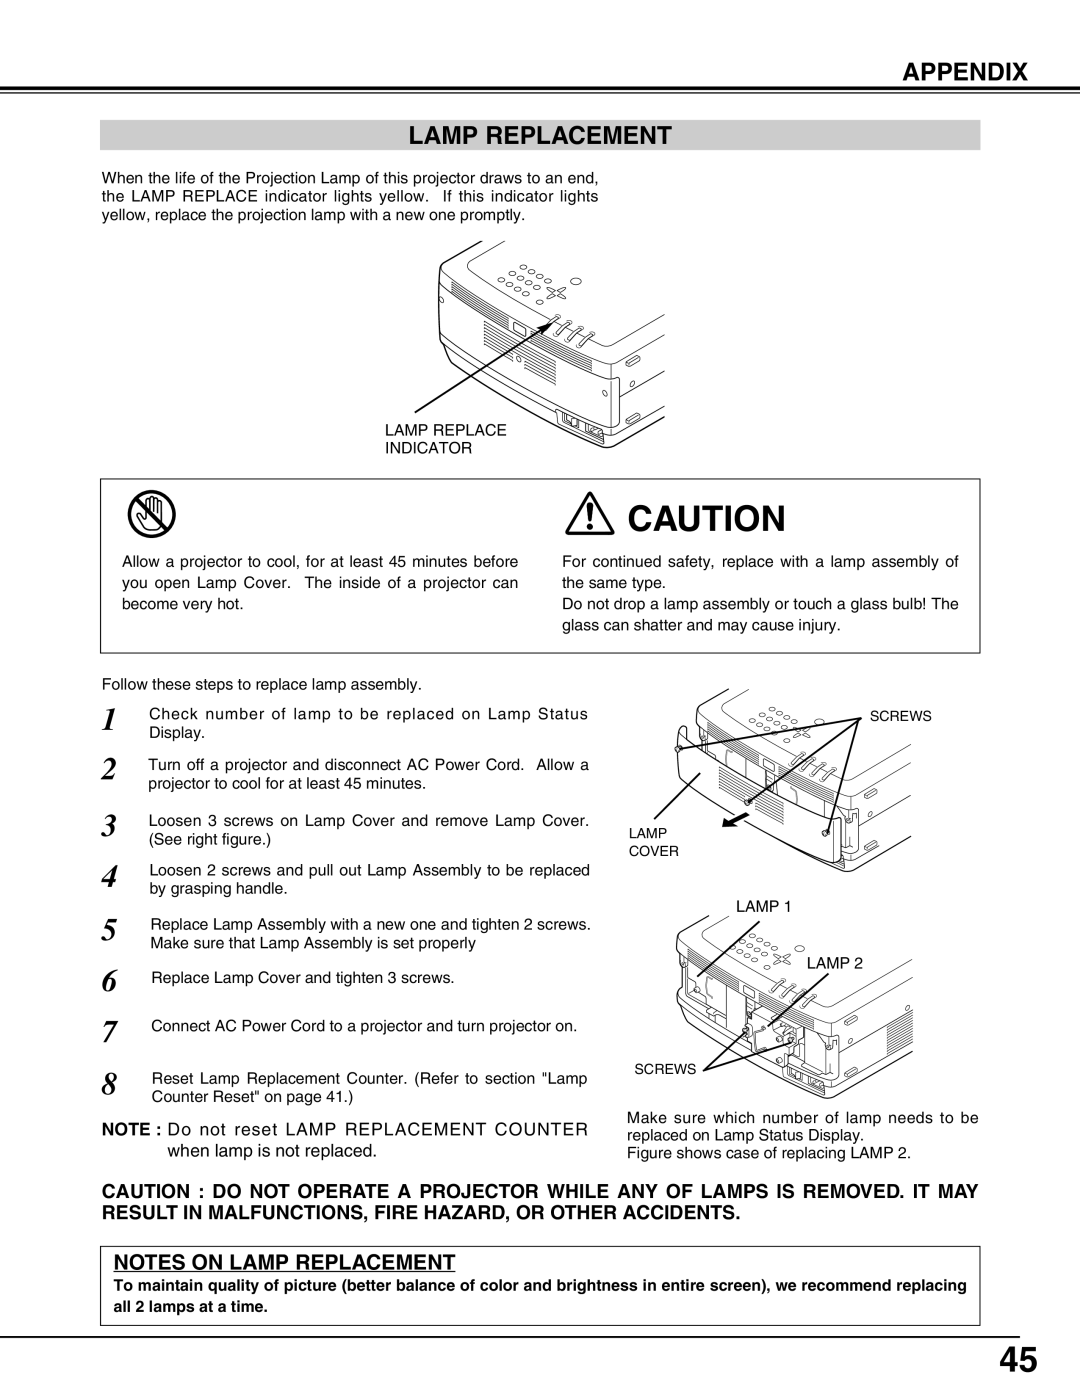 Christie Digital Systems 38-VIV302-01 user manual Appendix Lamp Replacement, Notes On Lamp Replacement 